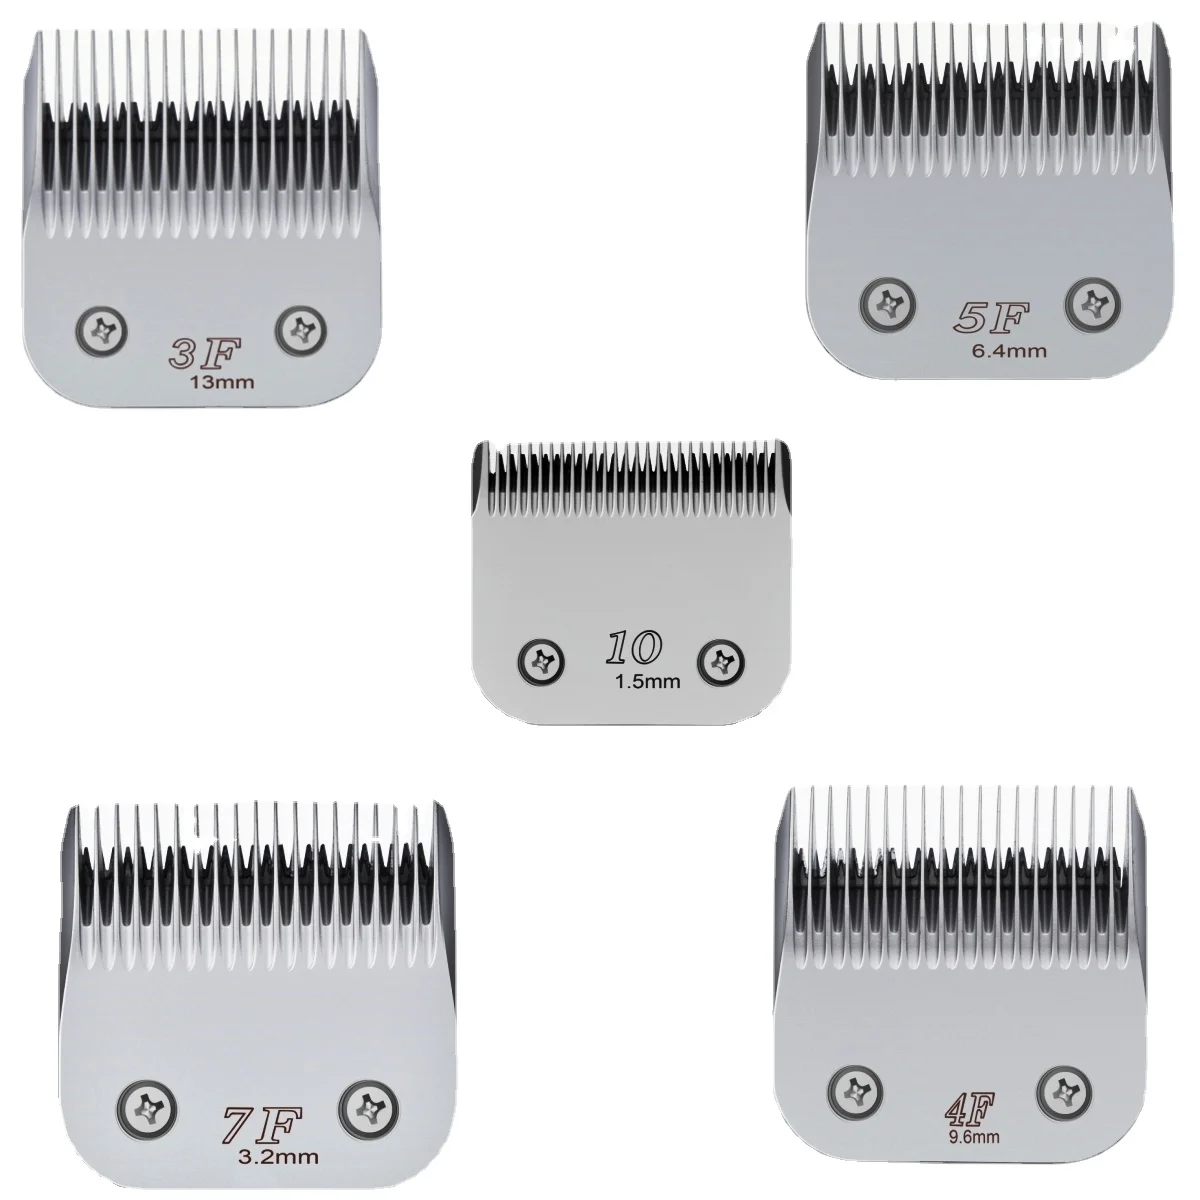 

Dog Grooming Clipper Replacement Blades Compatible with Andis/Wahl / Oster Dog Clippers,Detachable Stainless Steel Blade